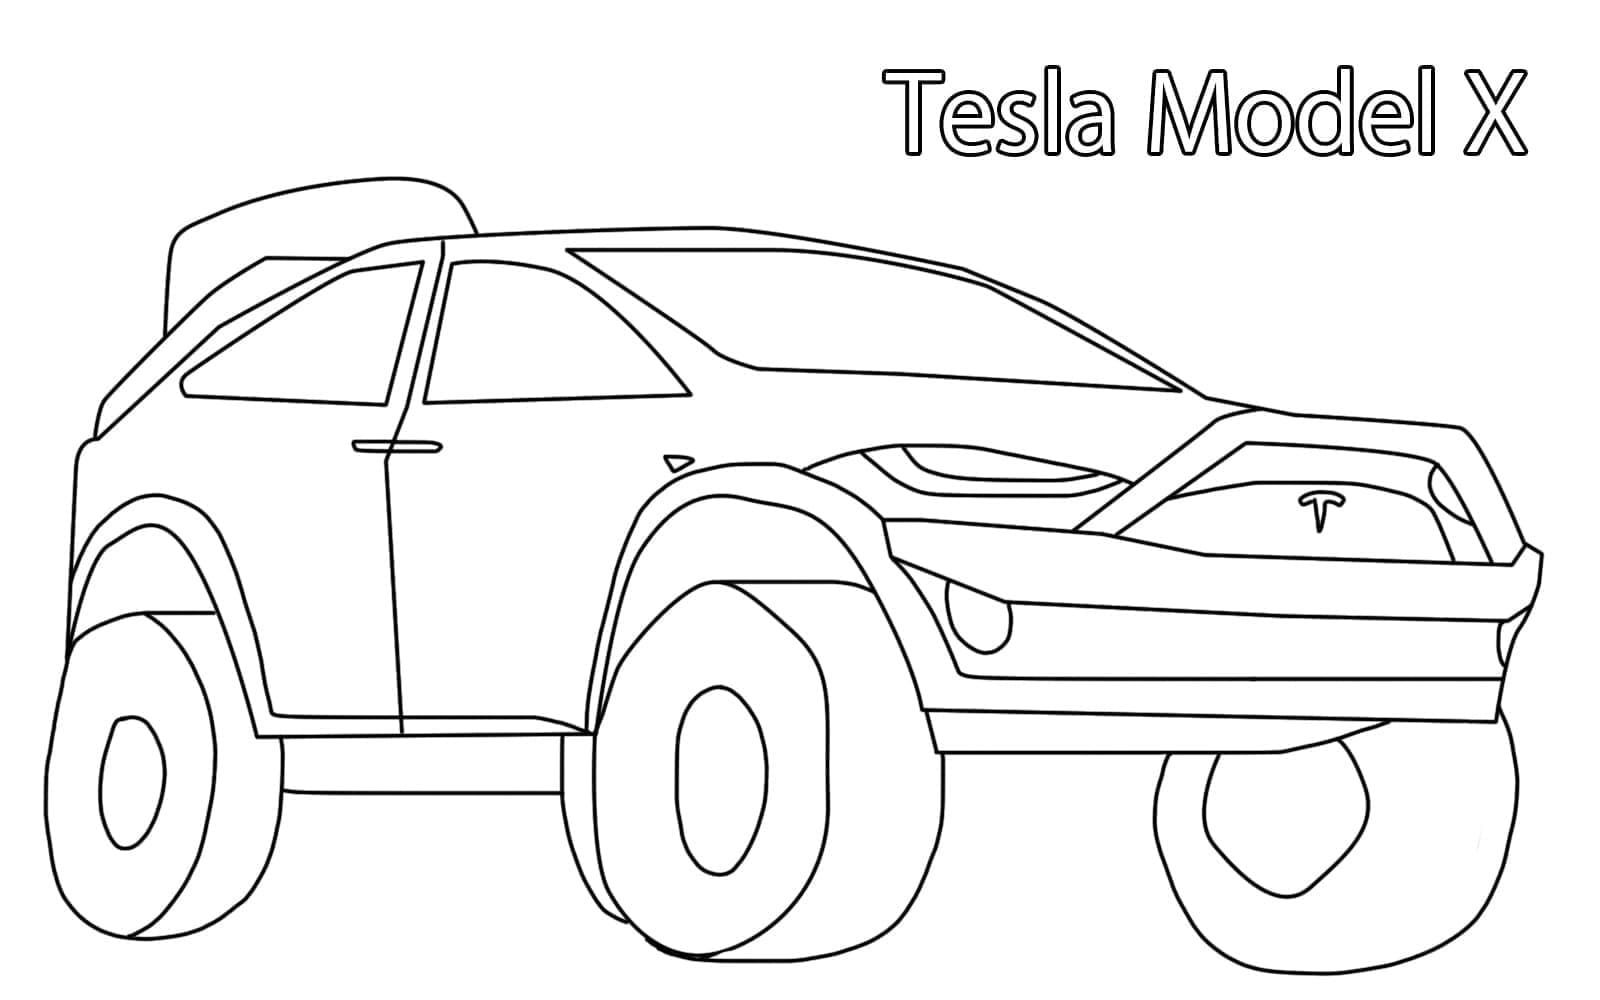 Free Tesla Model X coloring page - Download, Print or Color Online for Free